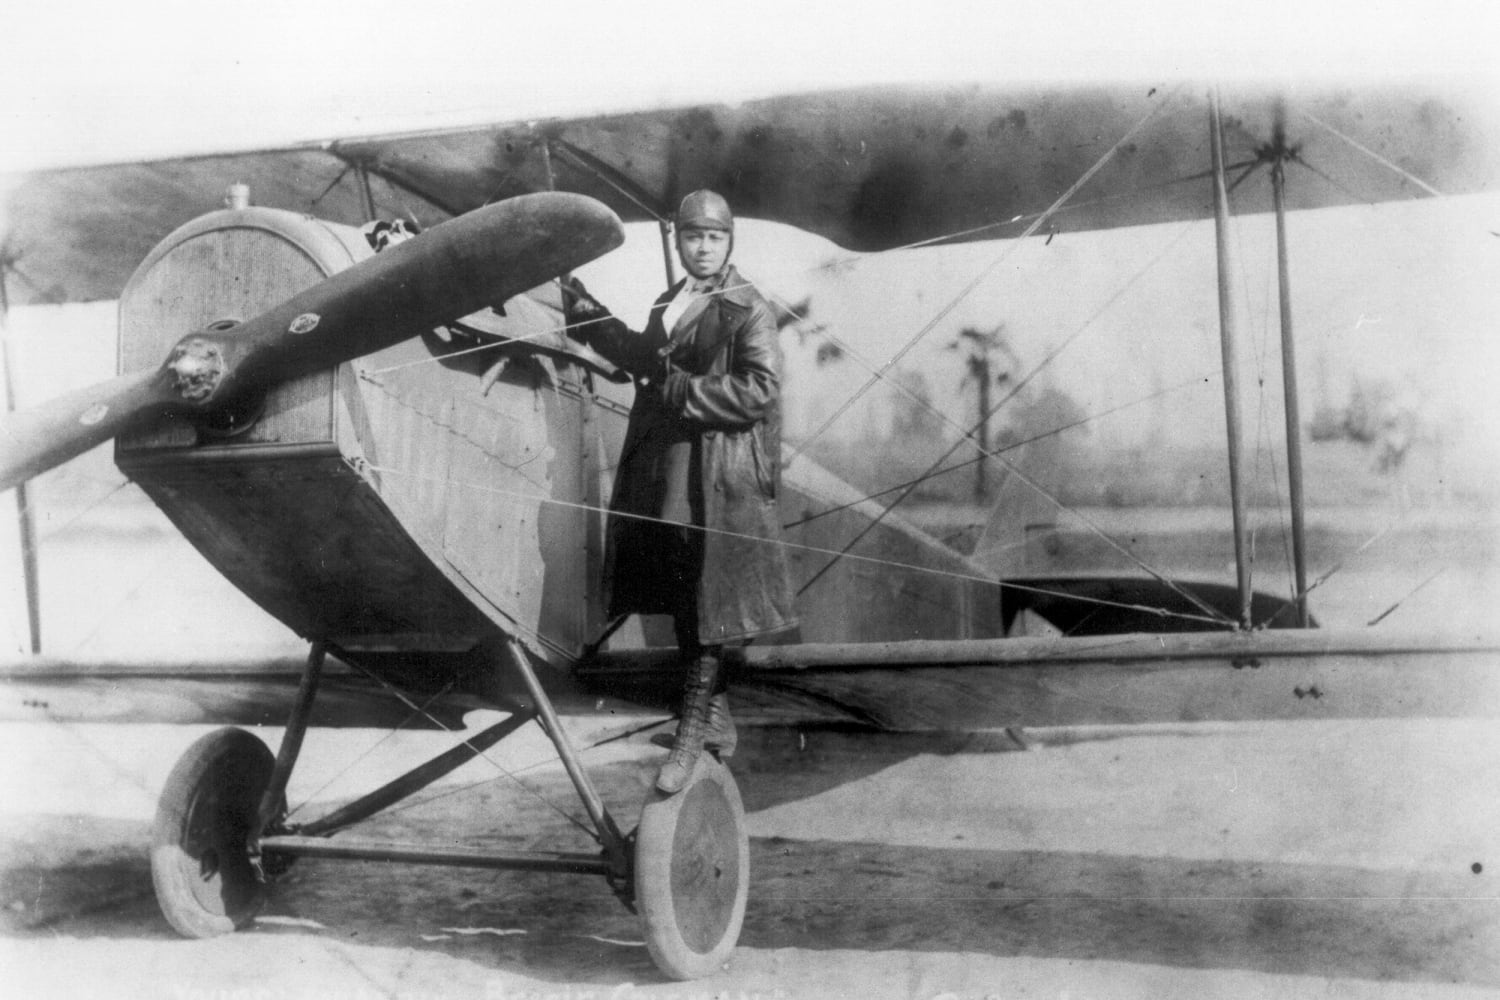 Family of Bessie Coleman maintains her legacy 100 years after pilot’s first public flight  